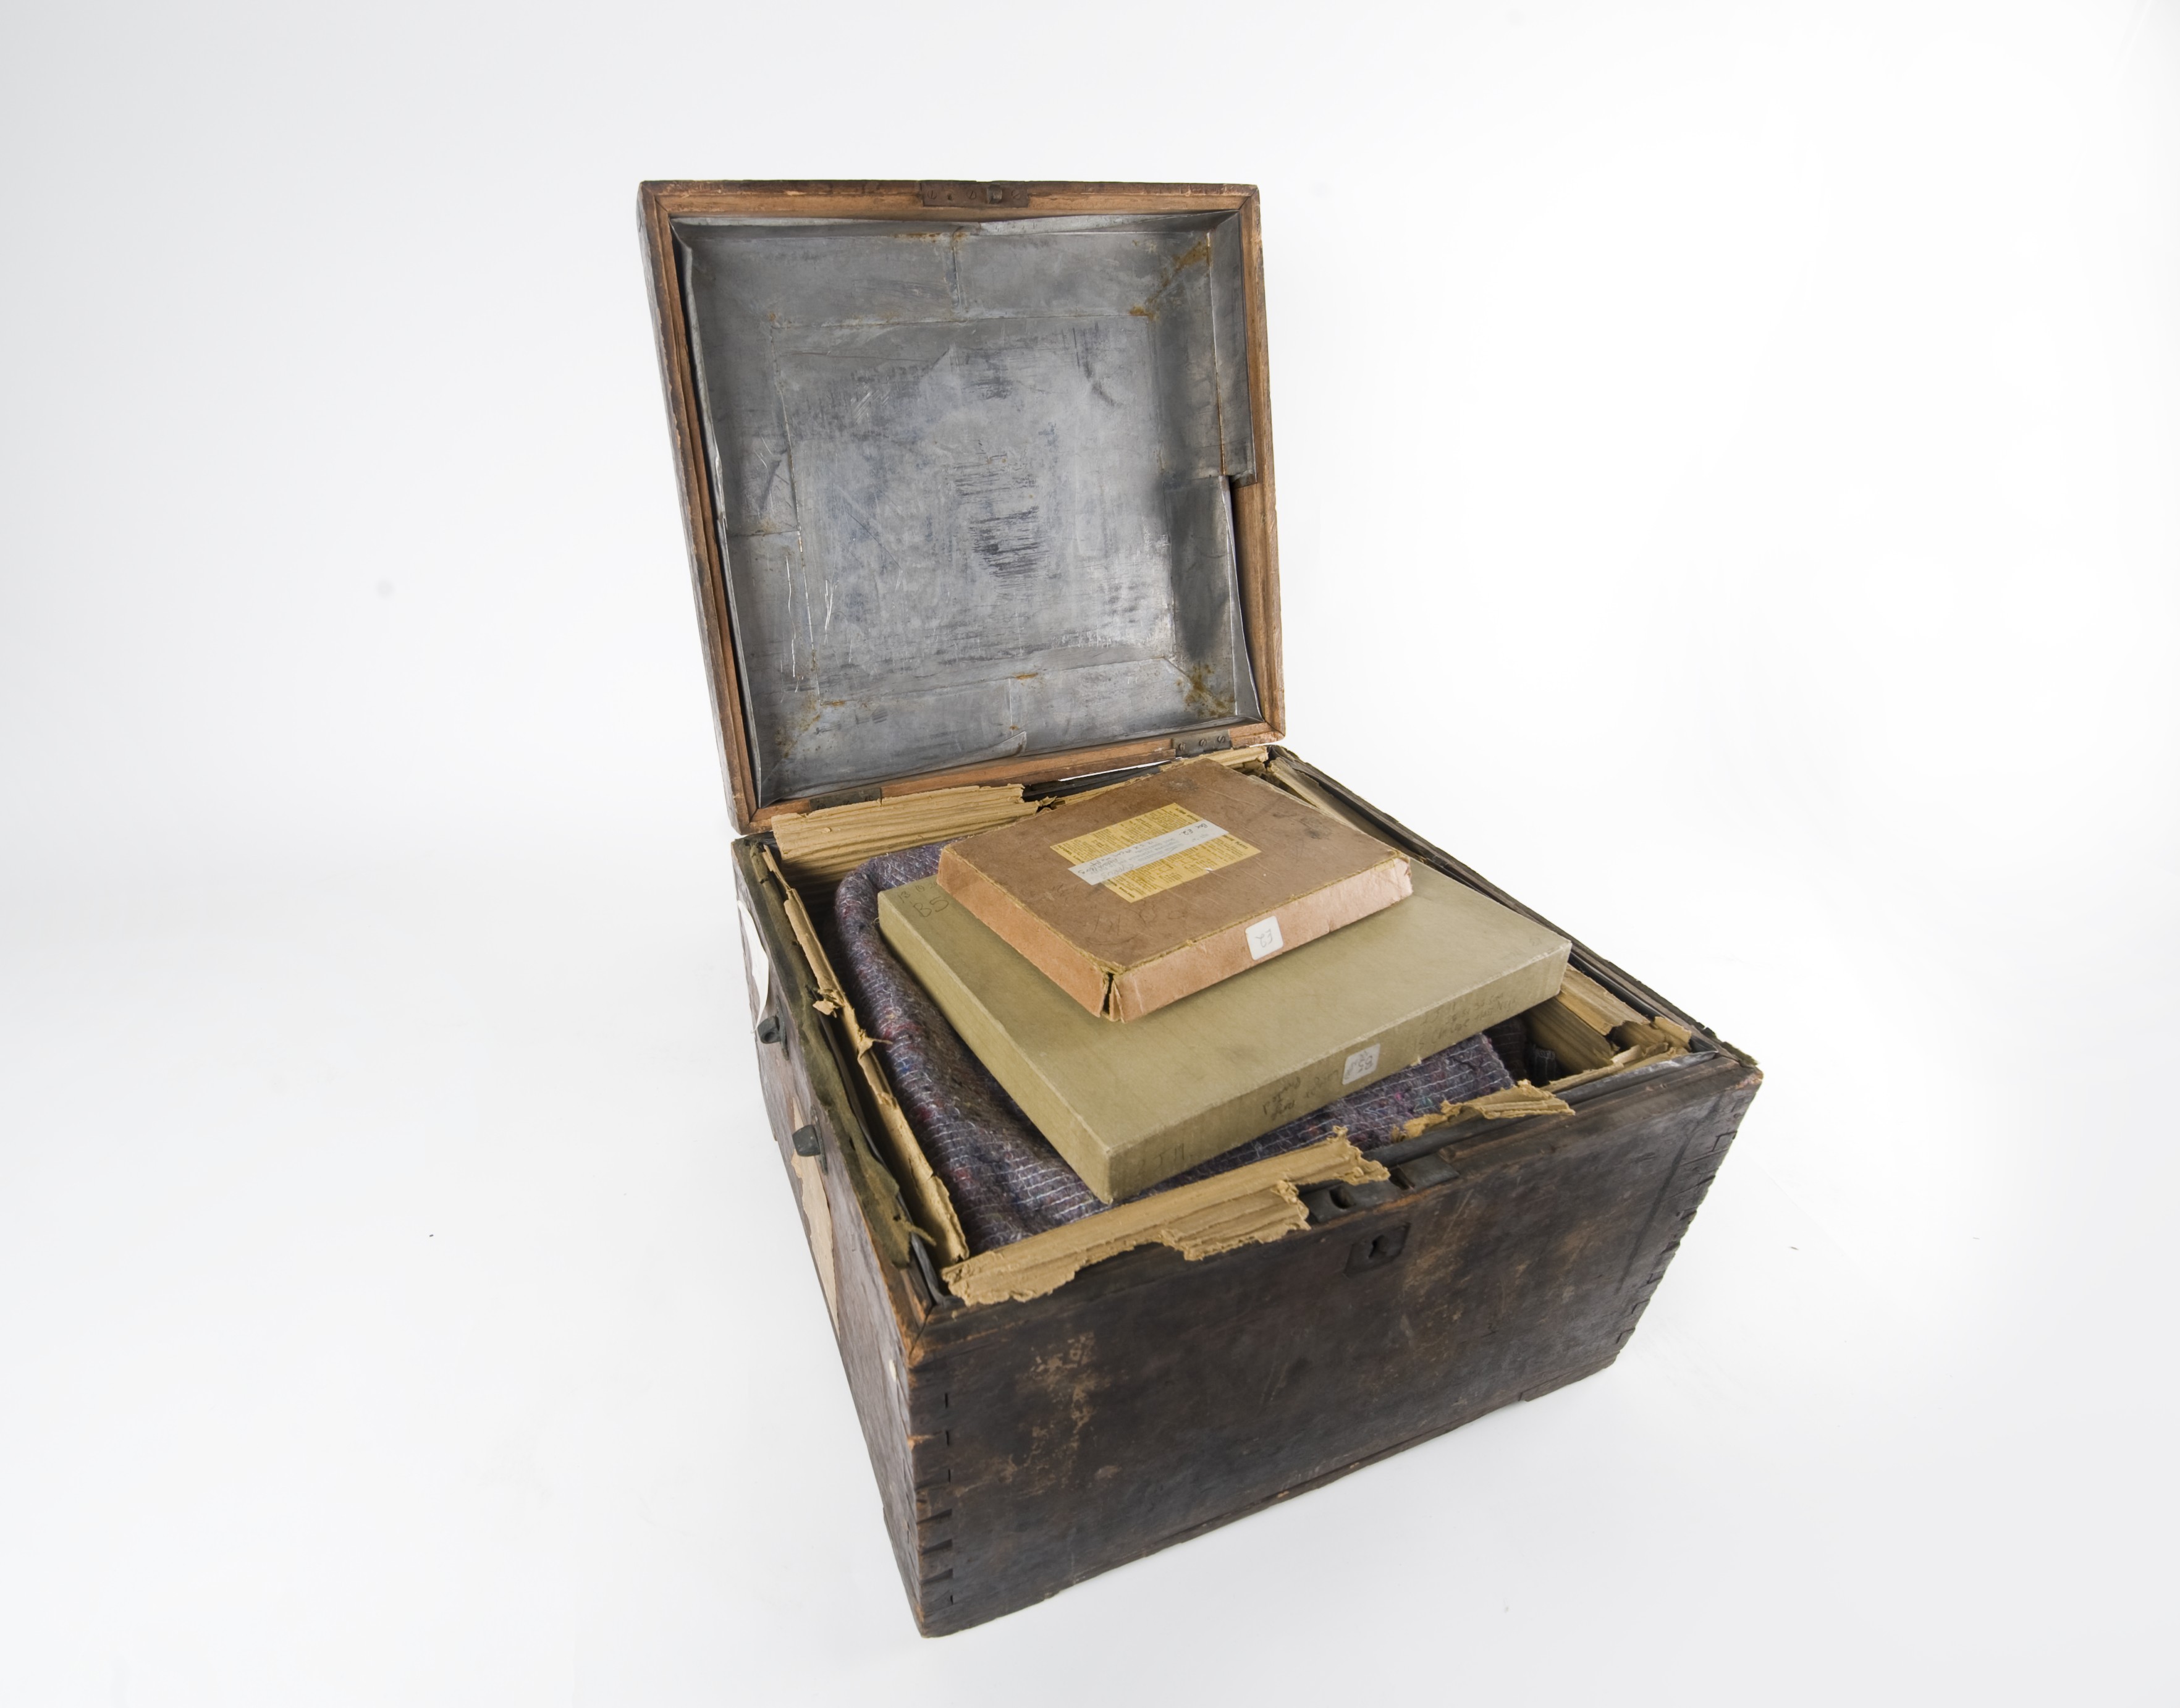 One of the chests used by photographer John Thomson Wellcome L0051605